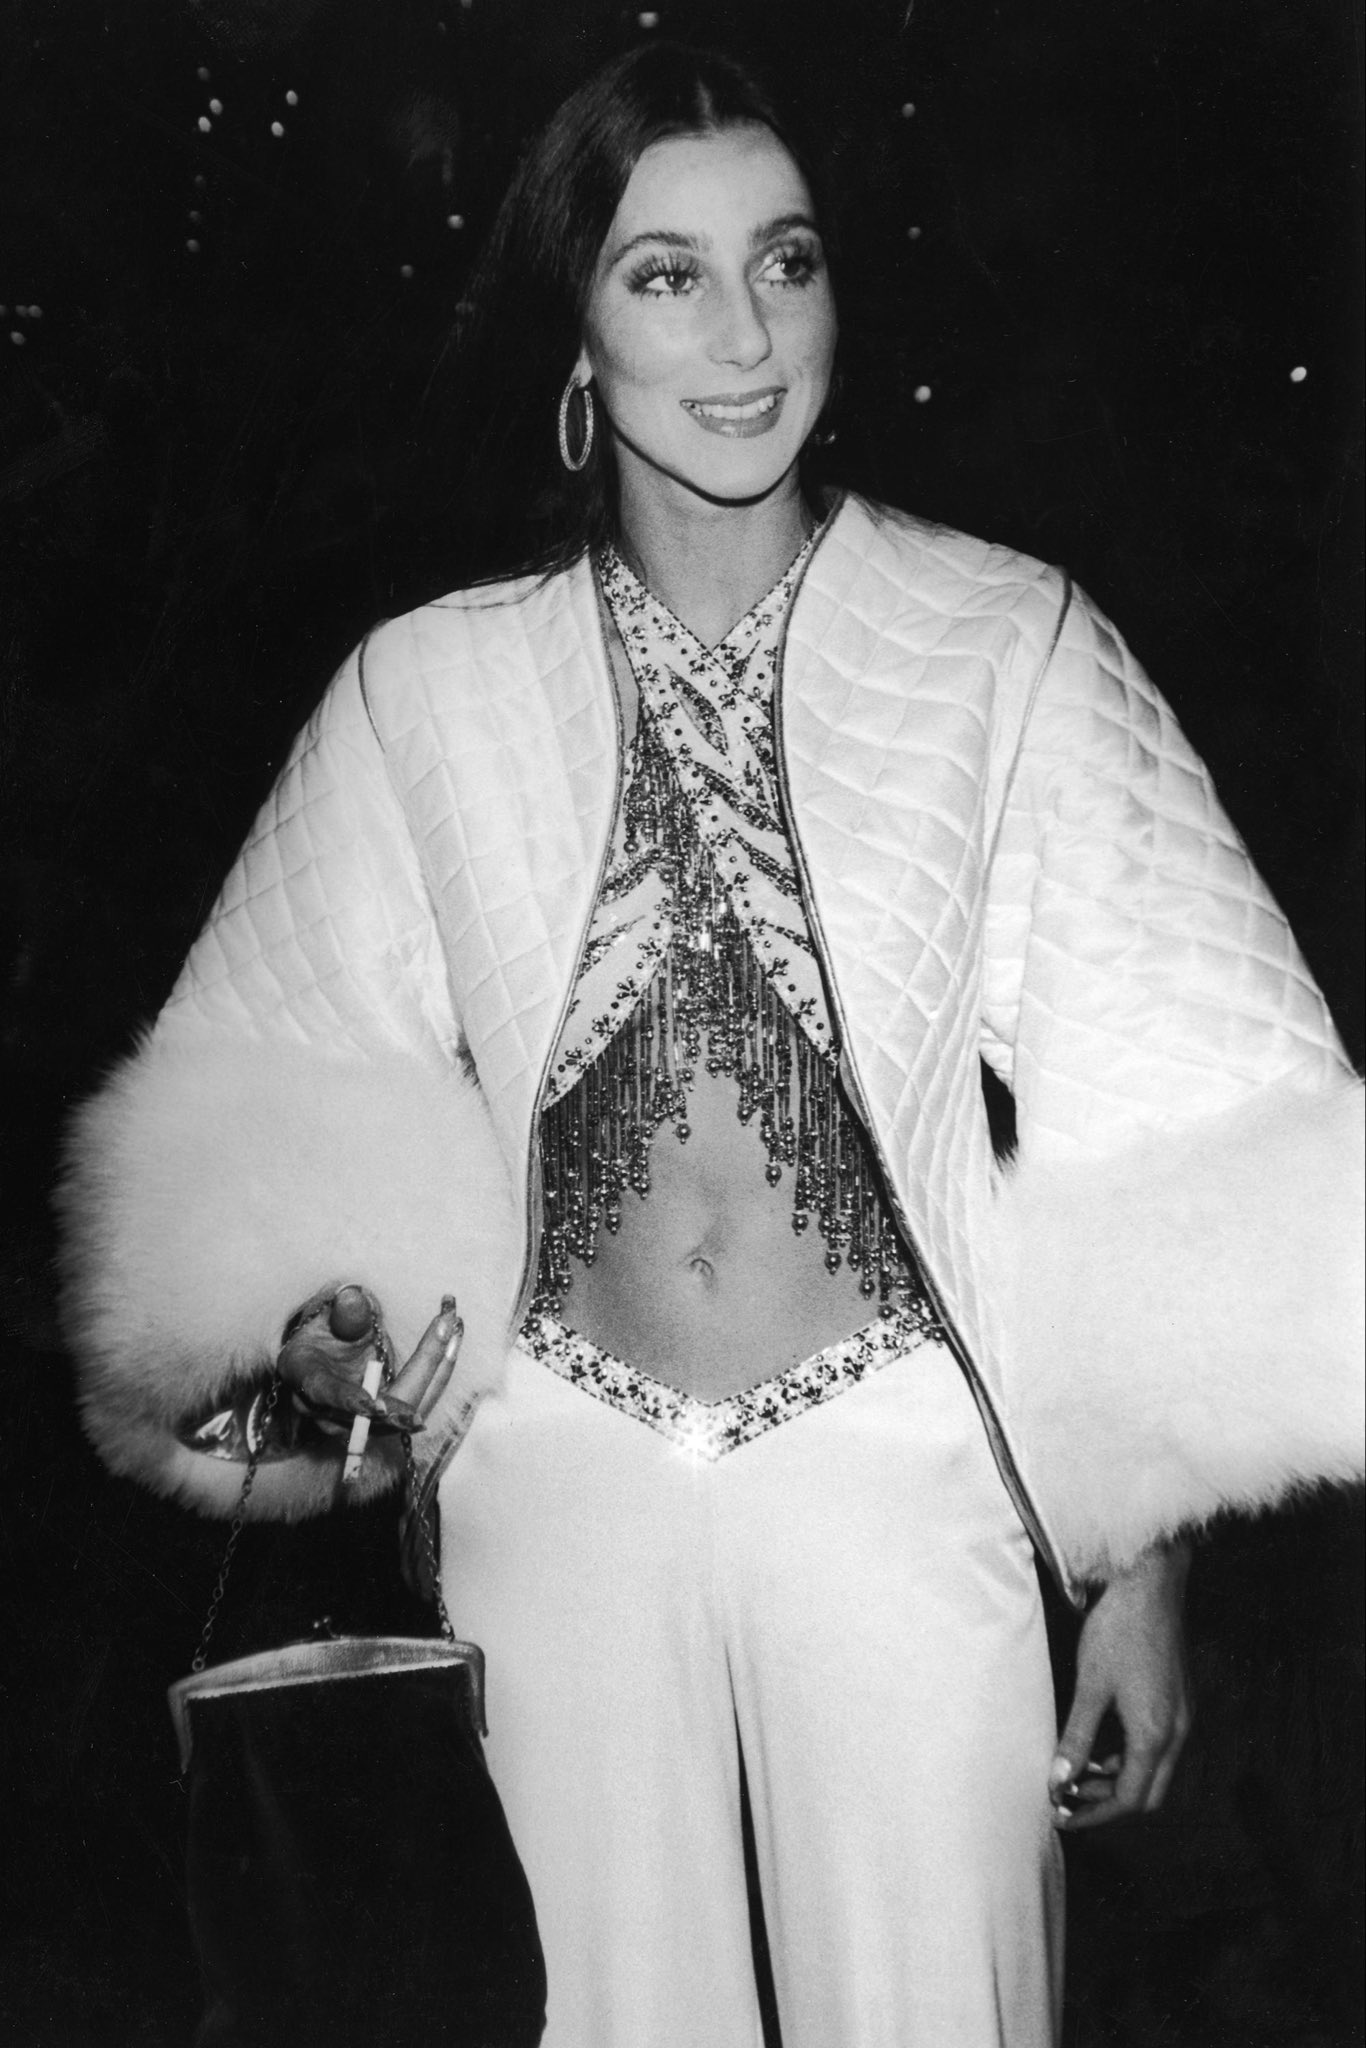 Happy 76th birthday to the one-and-only Cher, who was born on this day in 1946. 